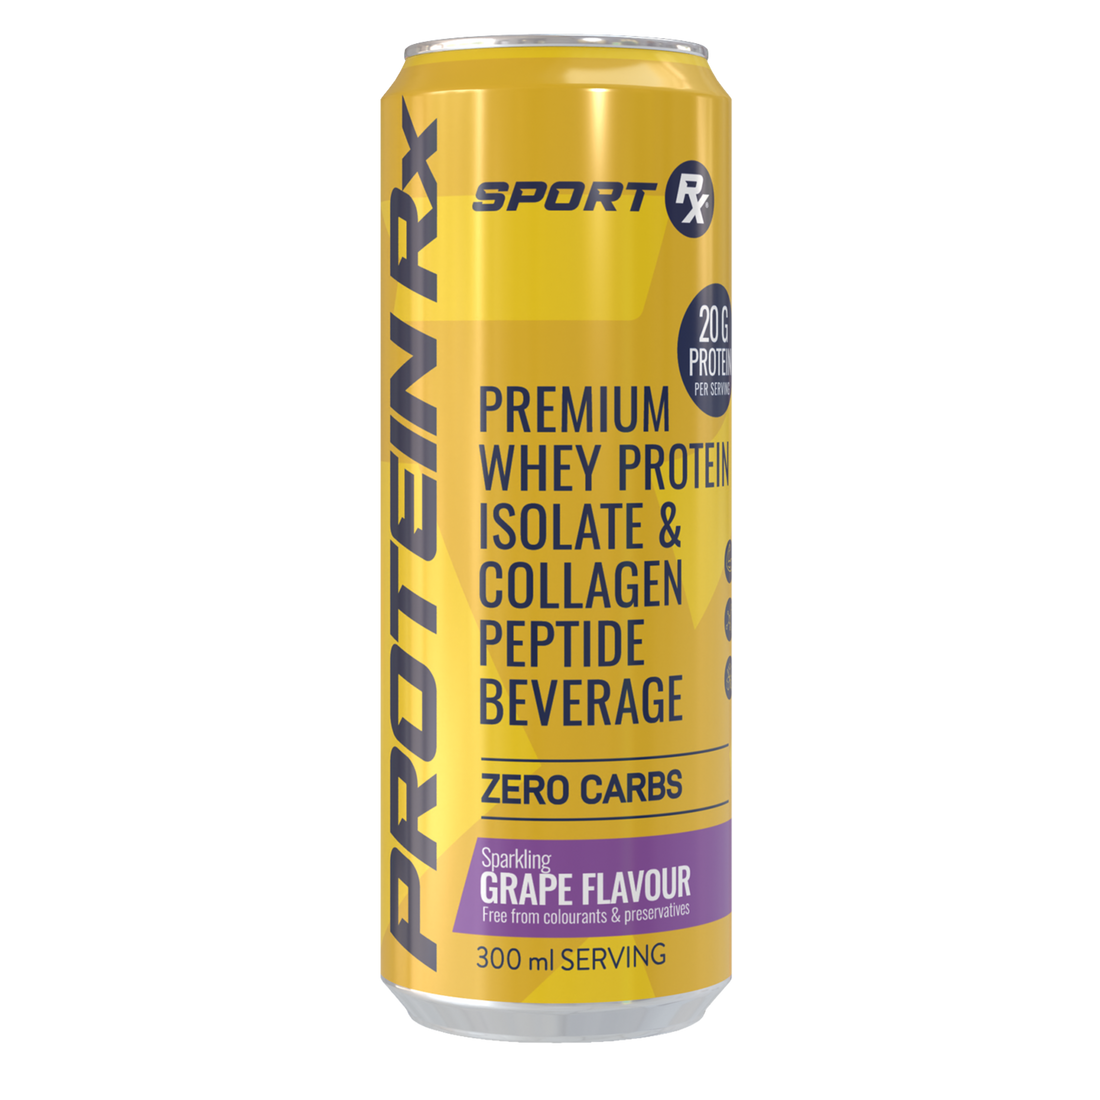 SPORT Rx | Protein Ready-to-Drink 6-Pack | Grape